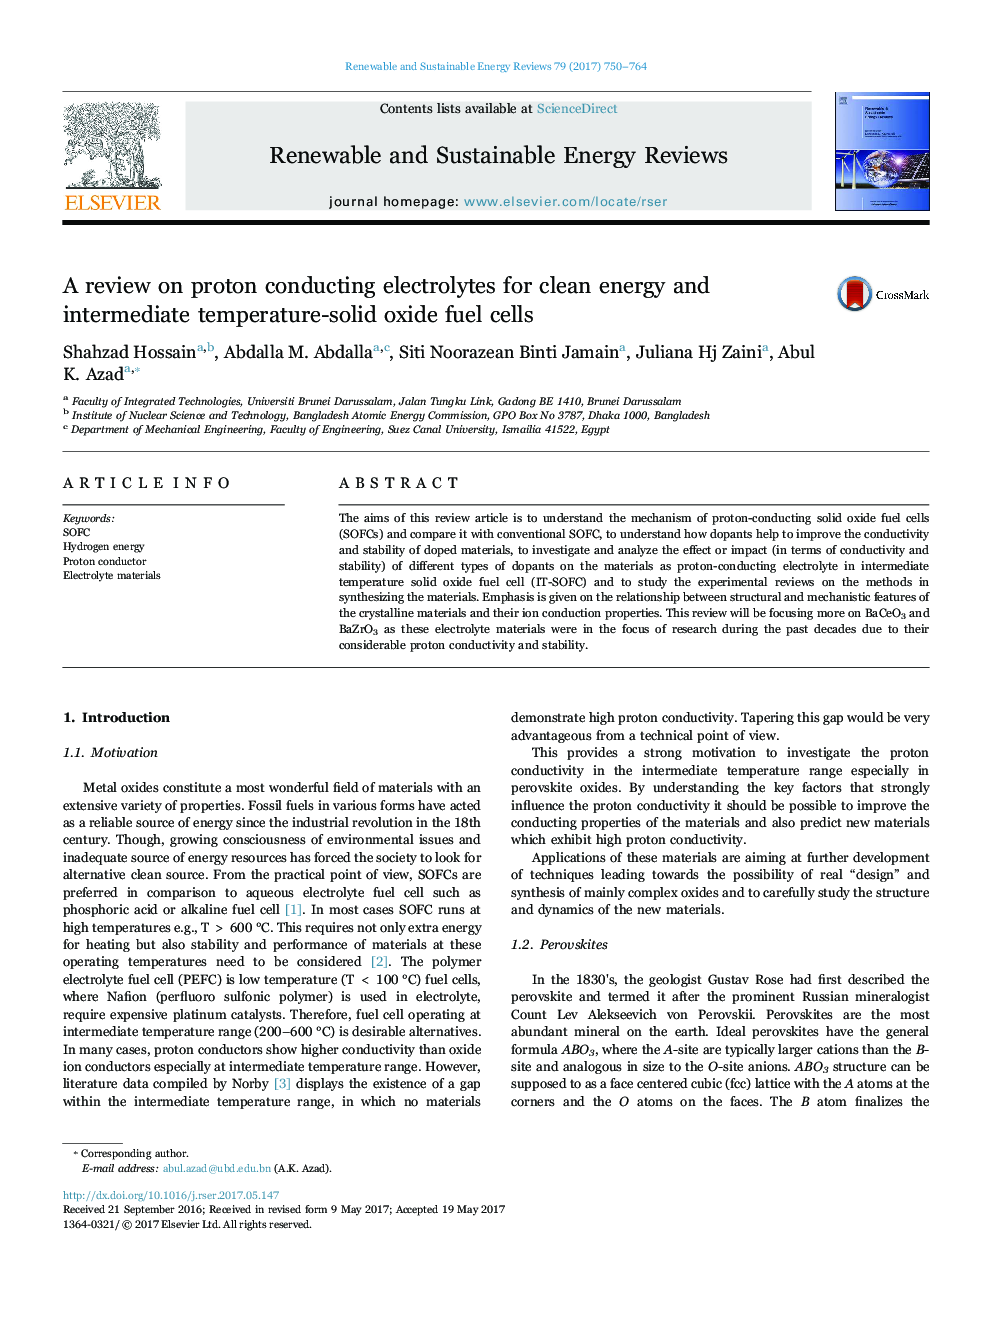 A review on proton conducting electrolytes for clean energy and intermediate temperature-solid oxide fuel cells